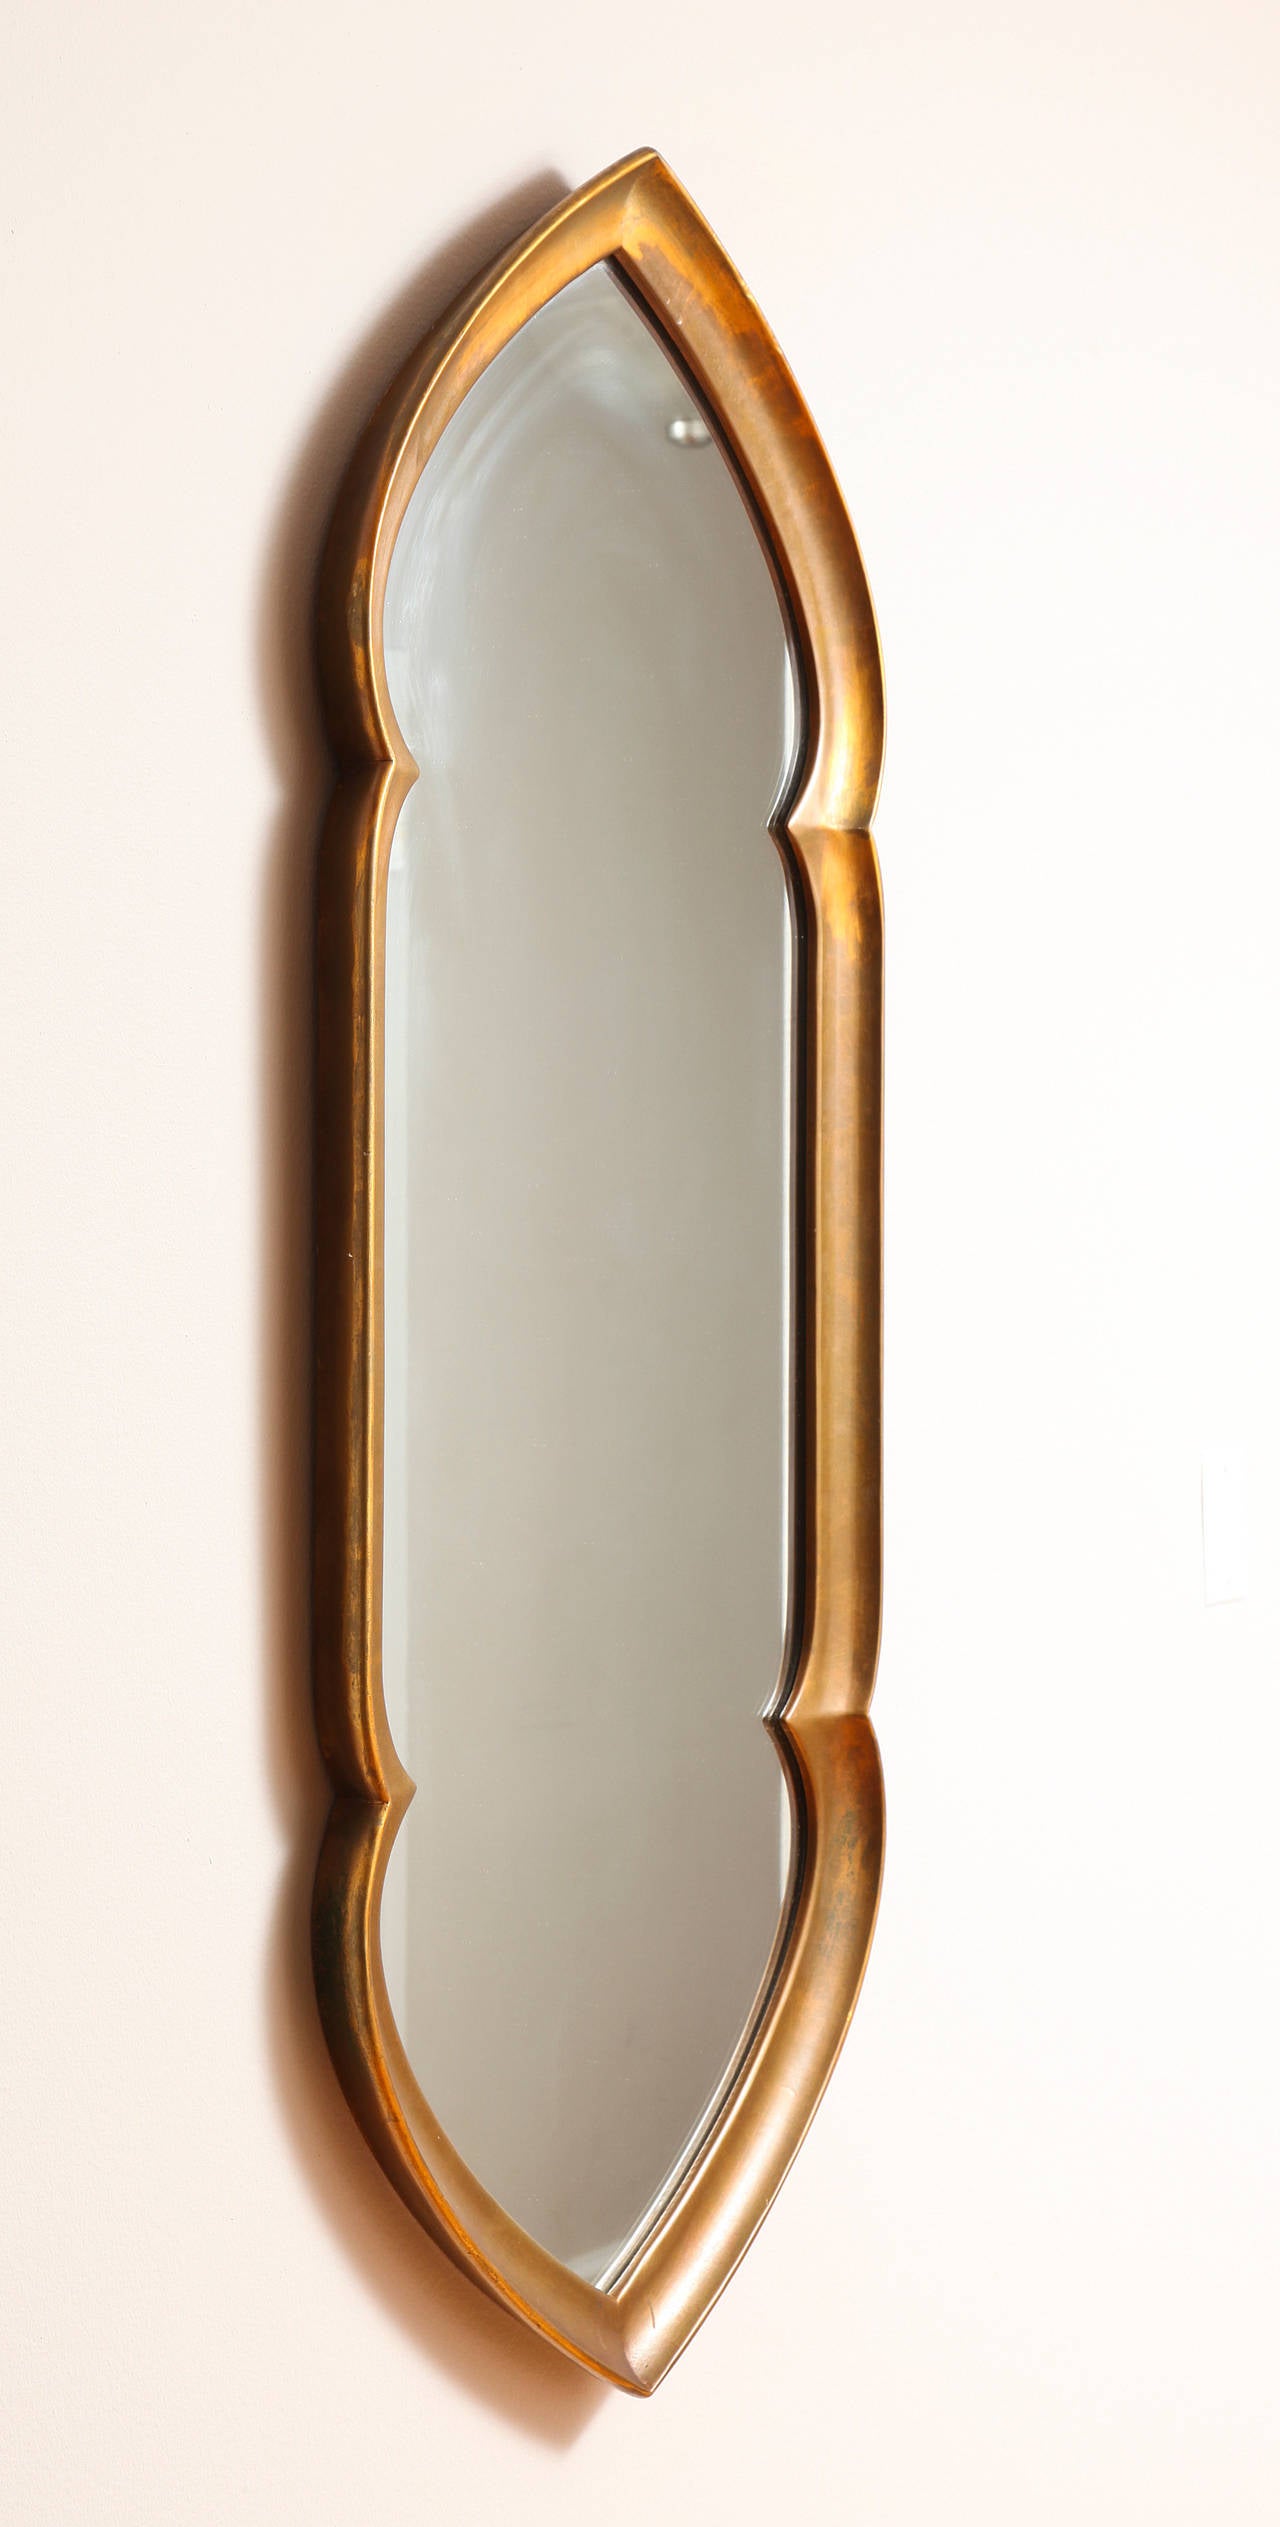 Giltwood Mid-Century Modern Gilt Mirror in Arabesque Form by La Barge